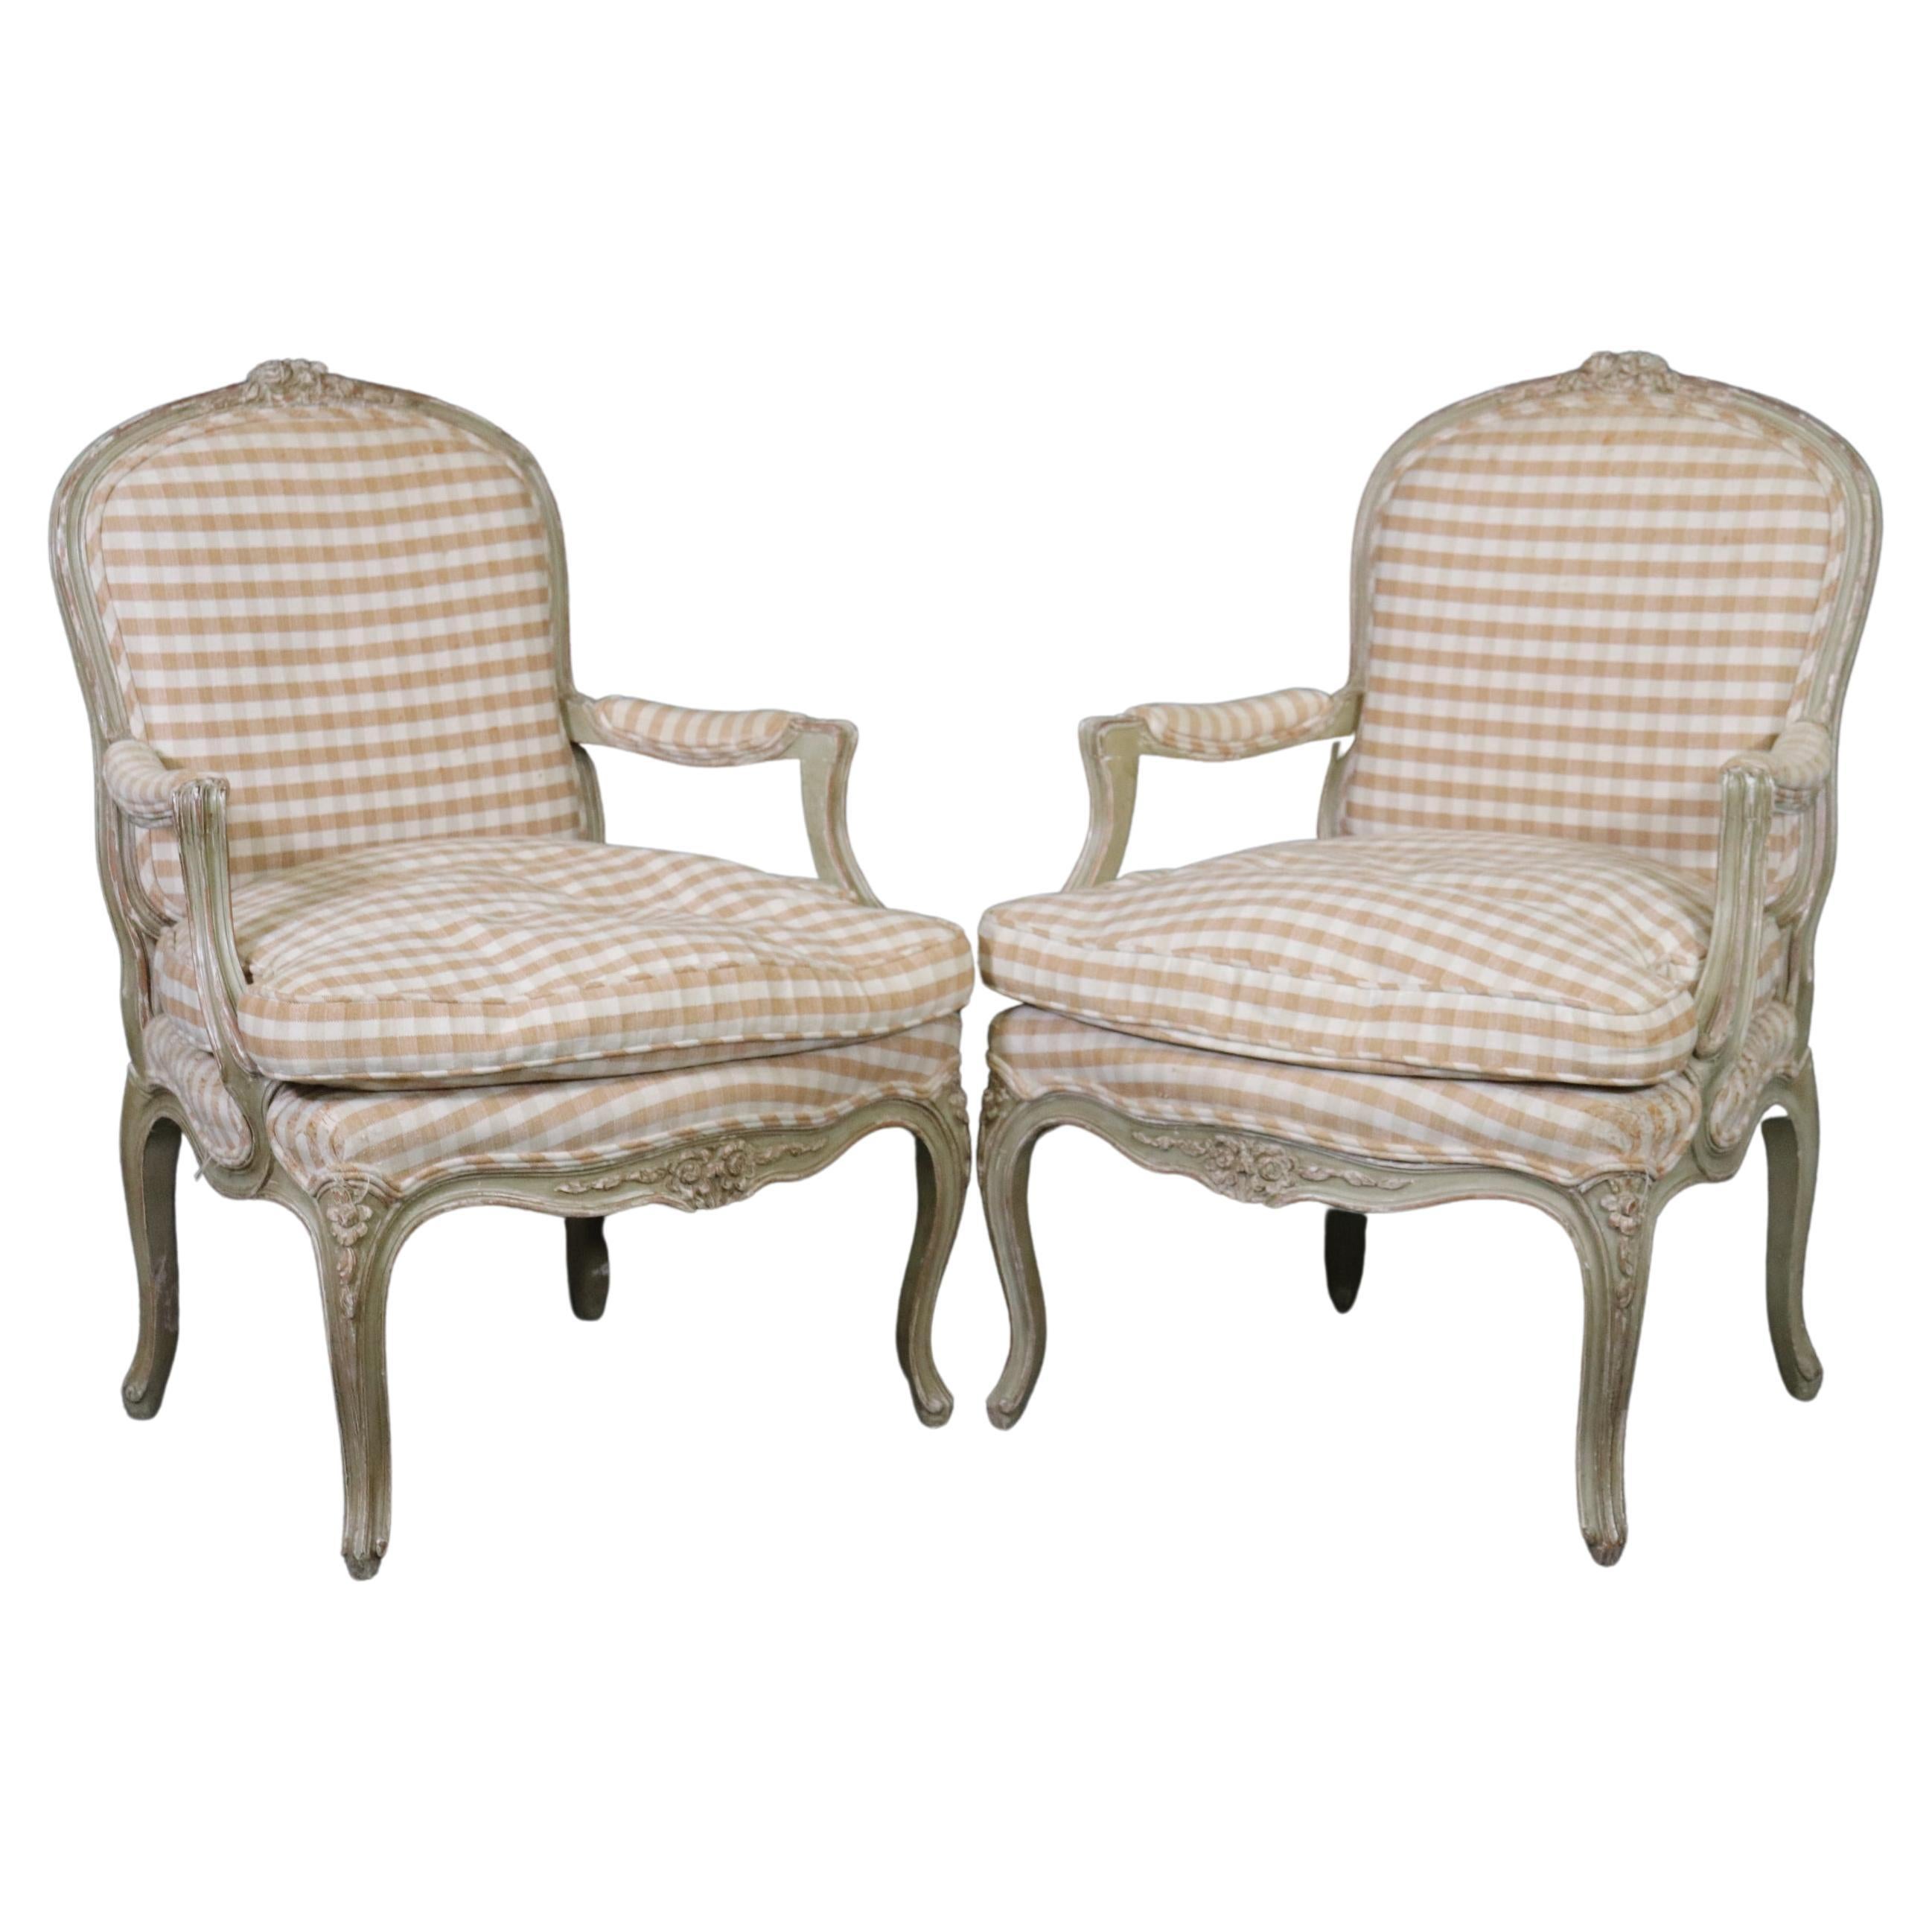 Pair of Distressed Painted French Carved Louis XV Armchairs, Circa 1930s For Sale